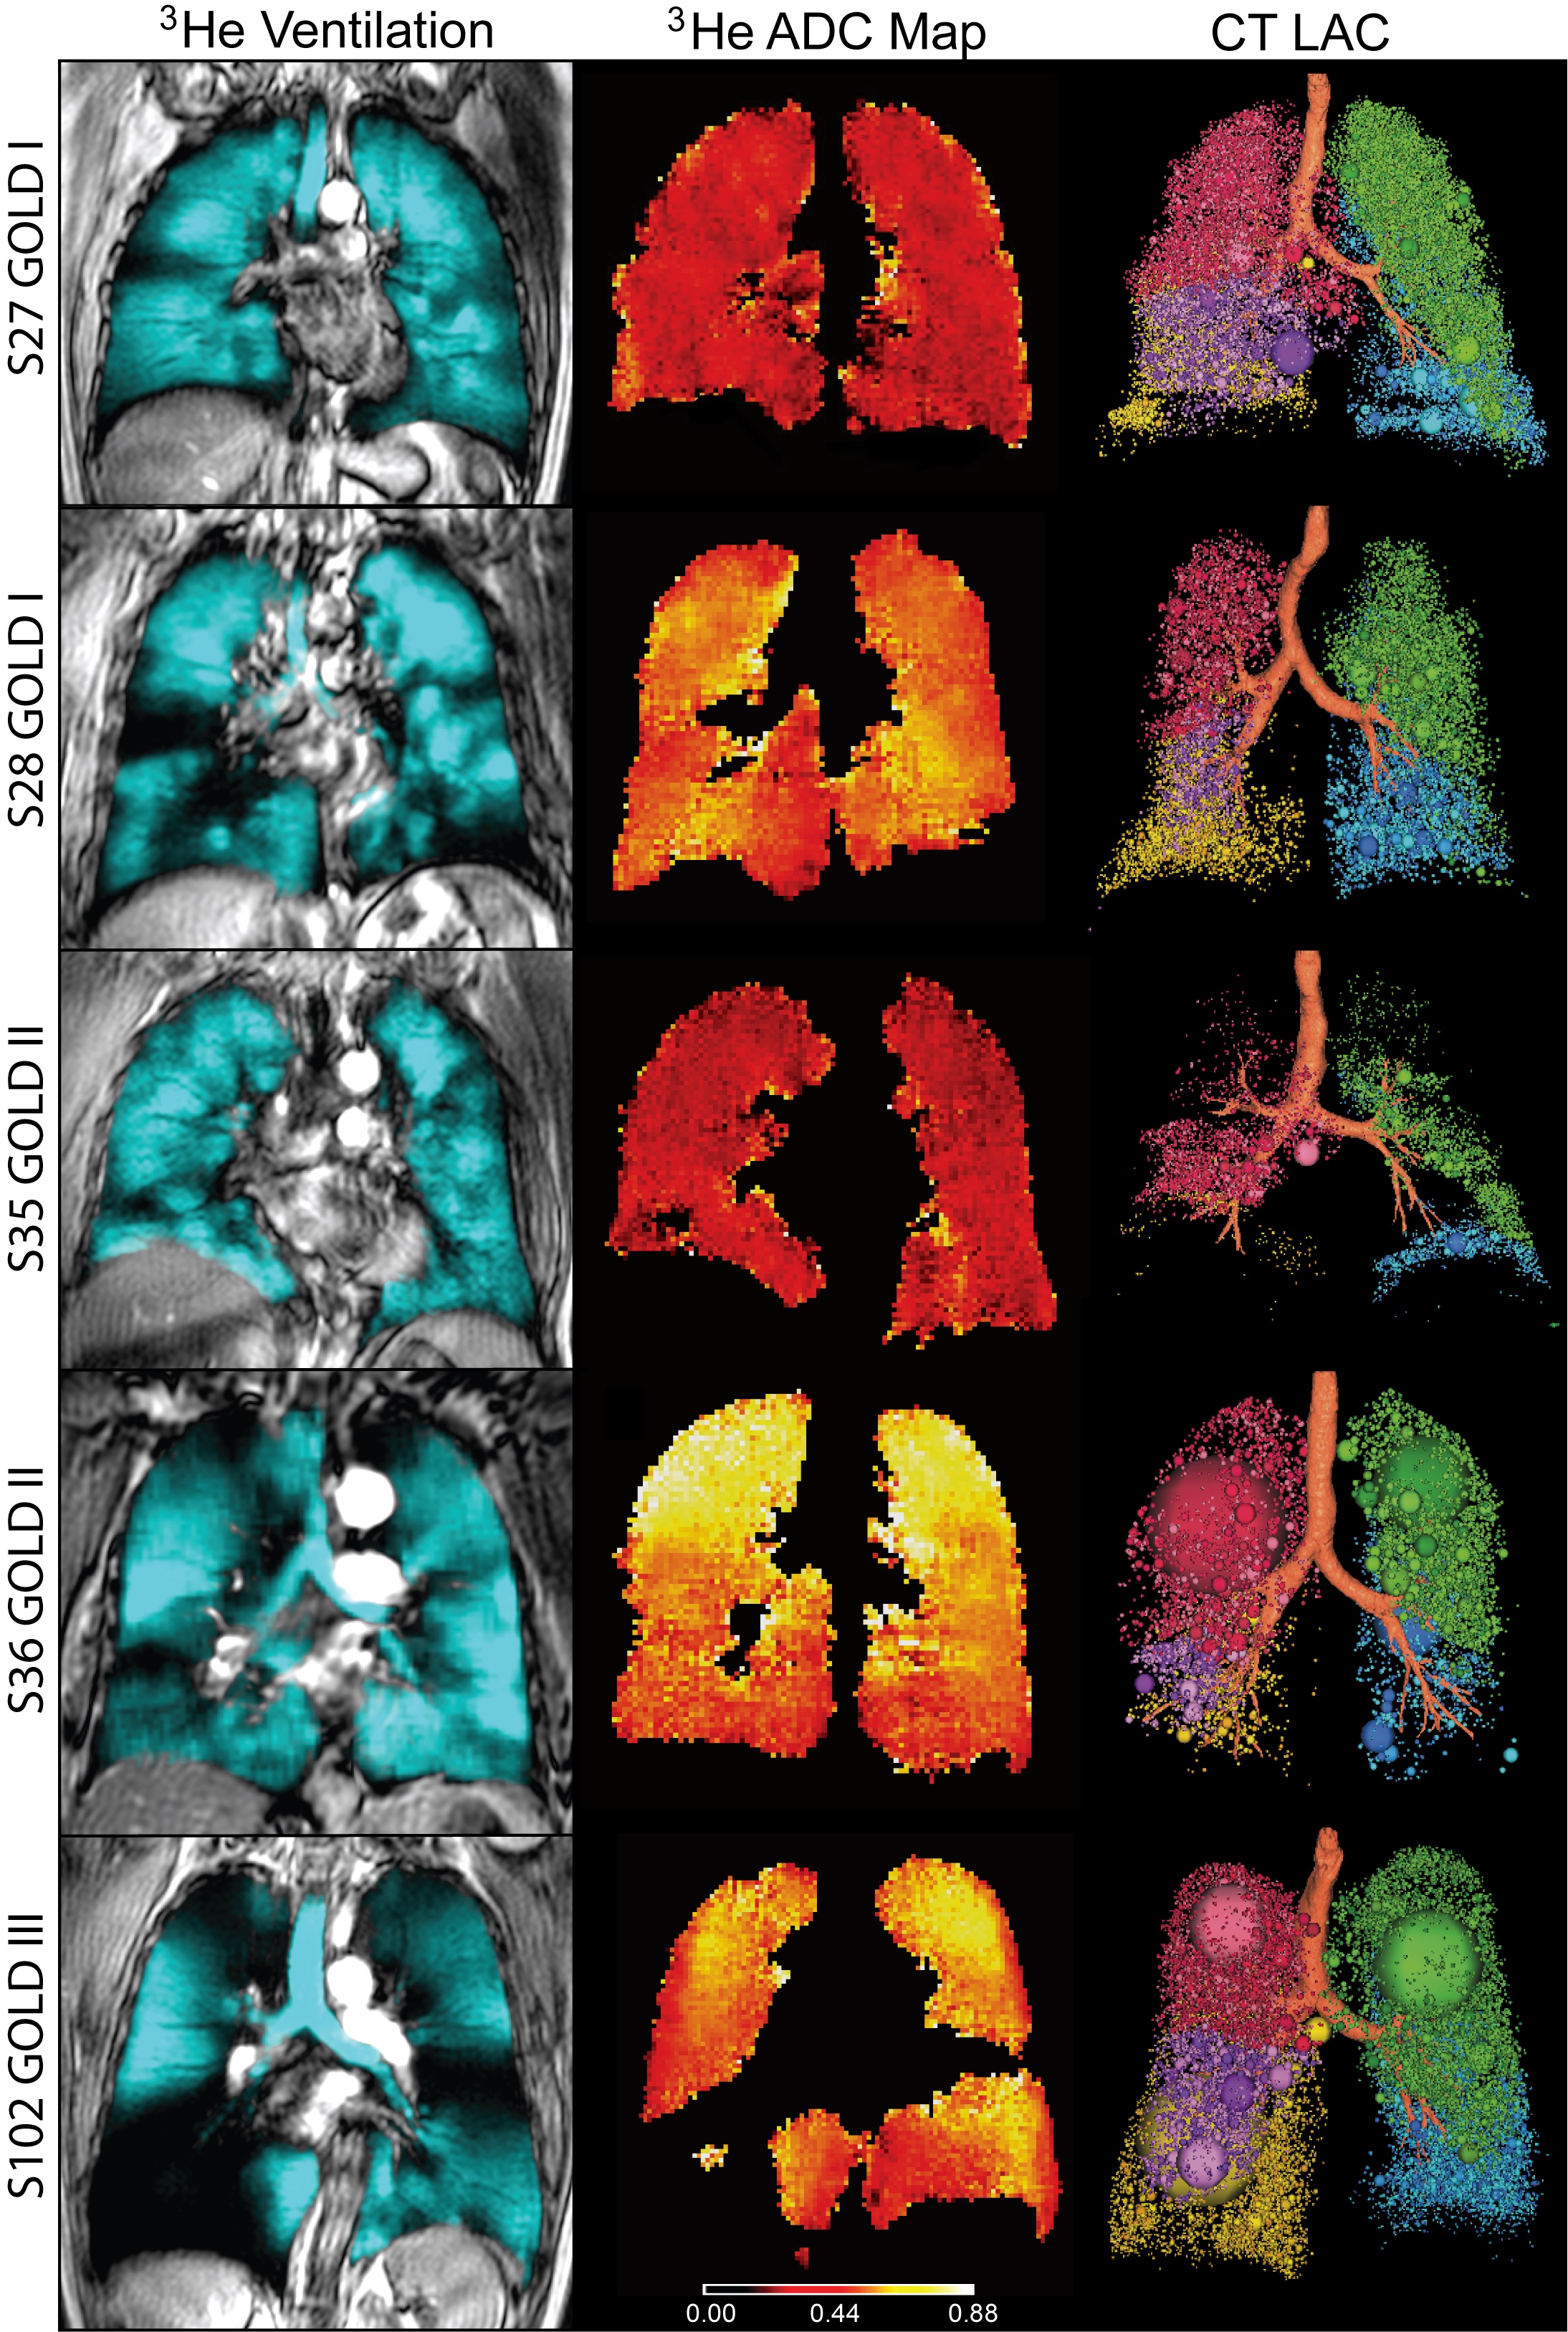 Image: Representative patients with mild-to-moderate or severe COPD (Photo courtesy of RSNA).